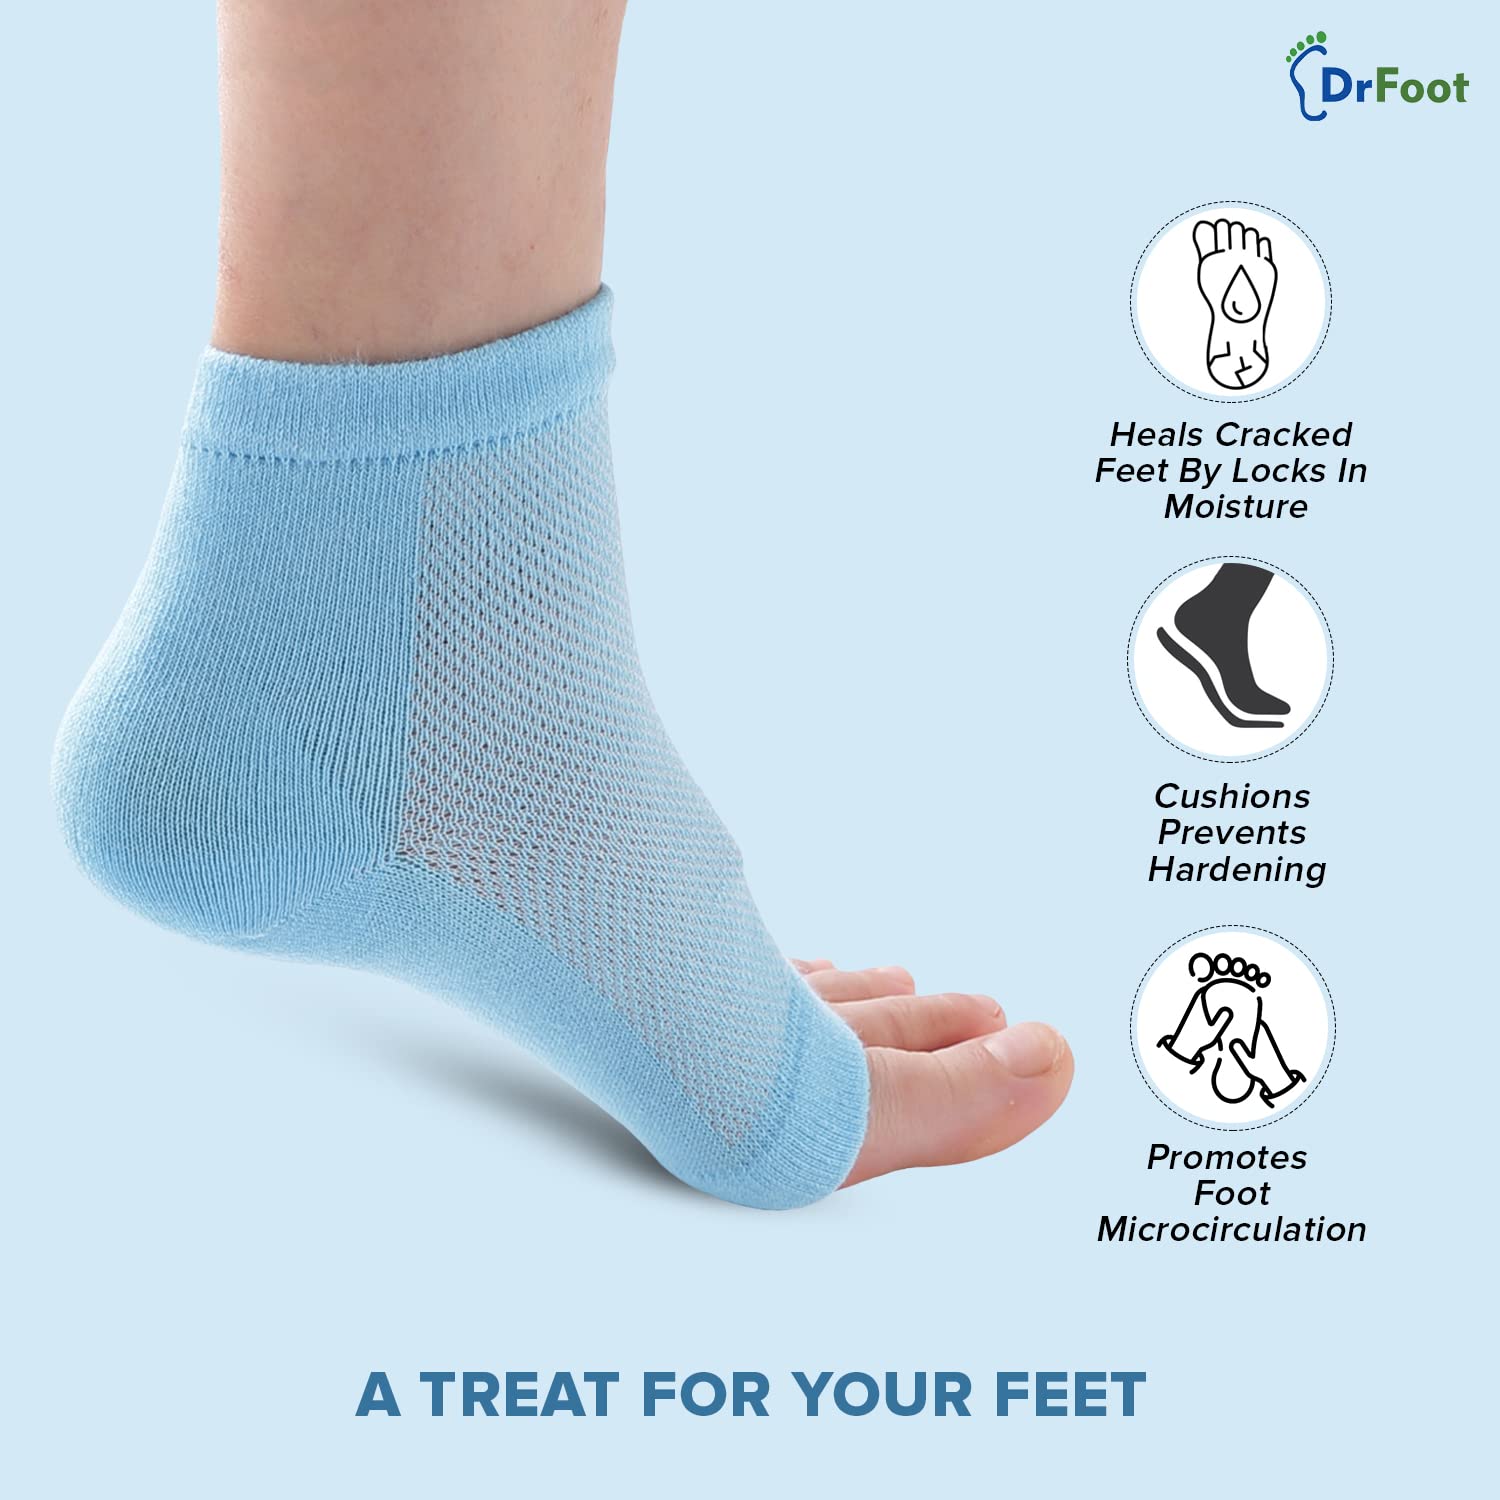 Dr Foot Silicone Gel Heel Socks | Silicone Gel Moisturizer Heel Sleeves To Smooth & Soften Rough Cracked Heels & Dry Feet Or Irritated Heels| For Men & Women | Free Size – 1 Pair (Pack of 3)